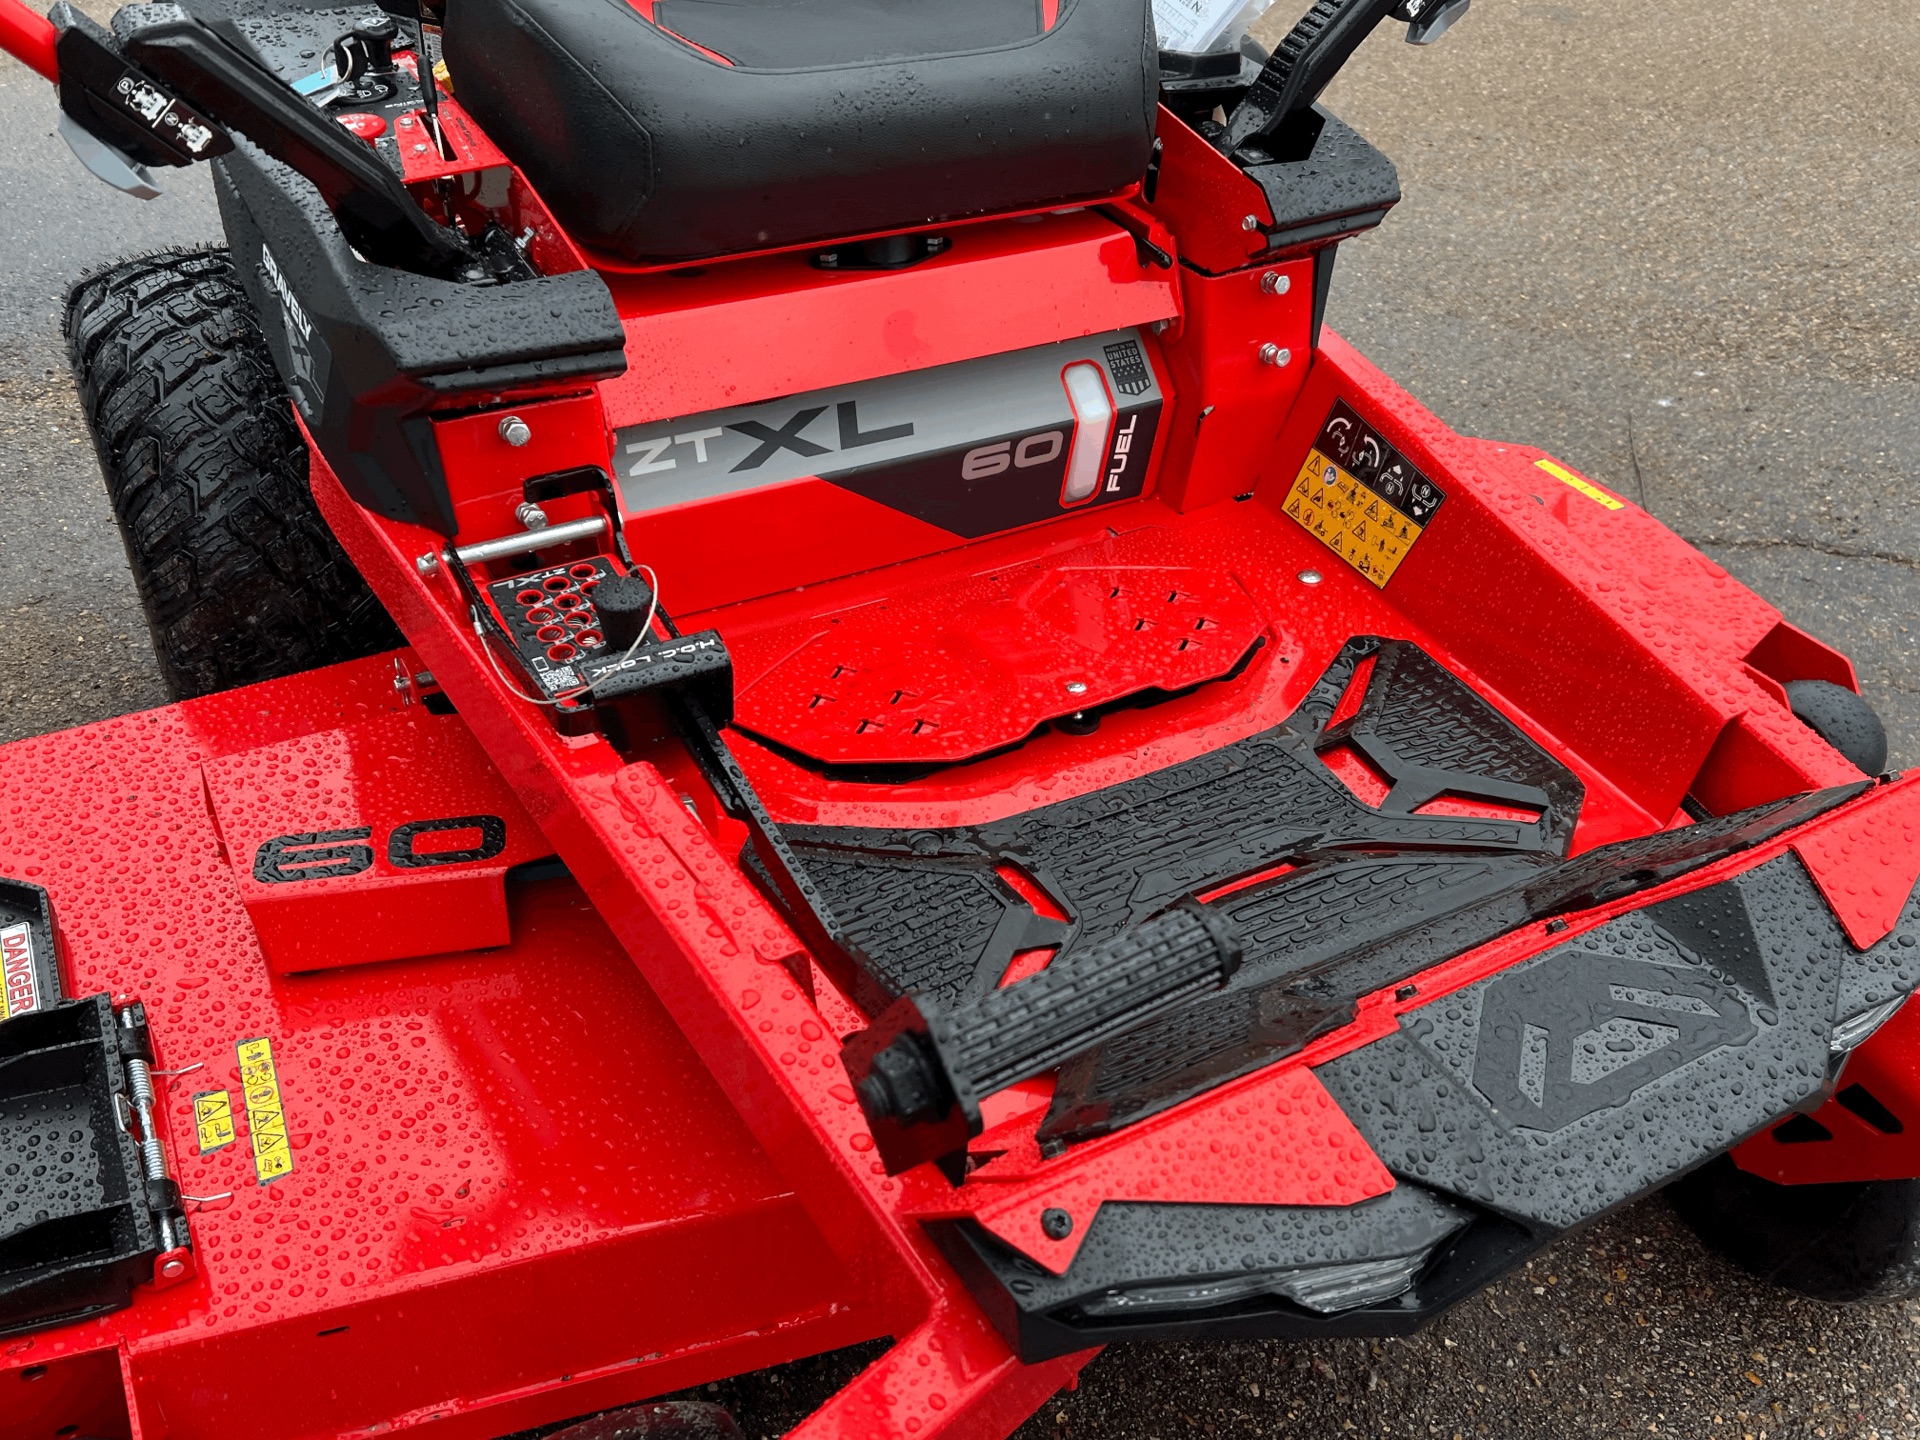 2024 Gravely USA ZT XL 60 in. Kawasaki FR730V 24 hp in Dyersburg, Tennessee - Photo 7